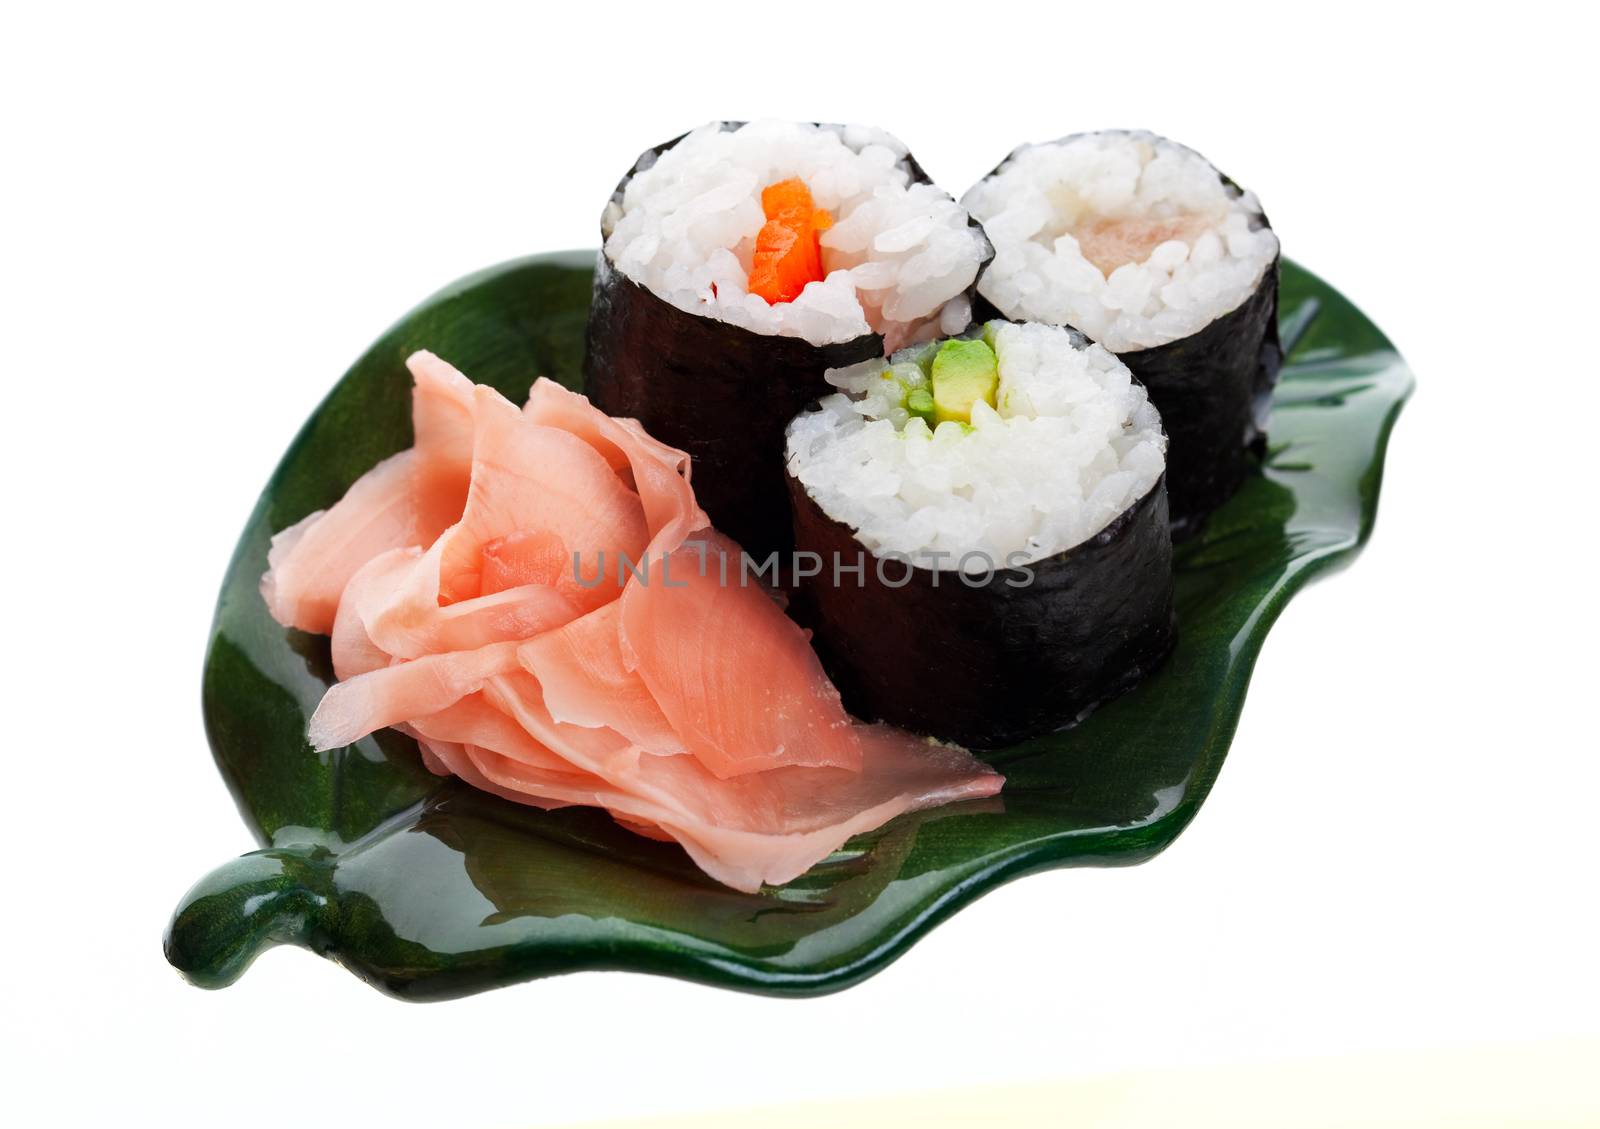 Three kinds of sushi with ginger on a leaf shaped plate.  Shot on white background.